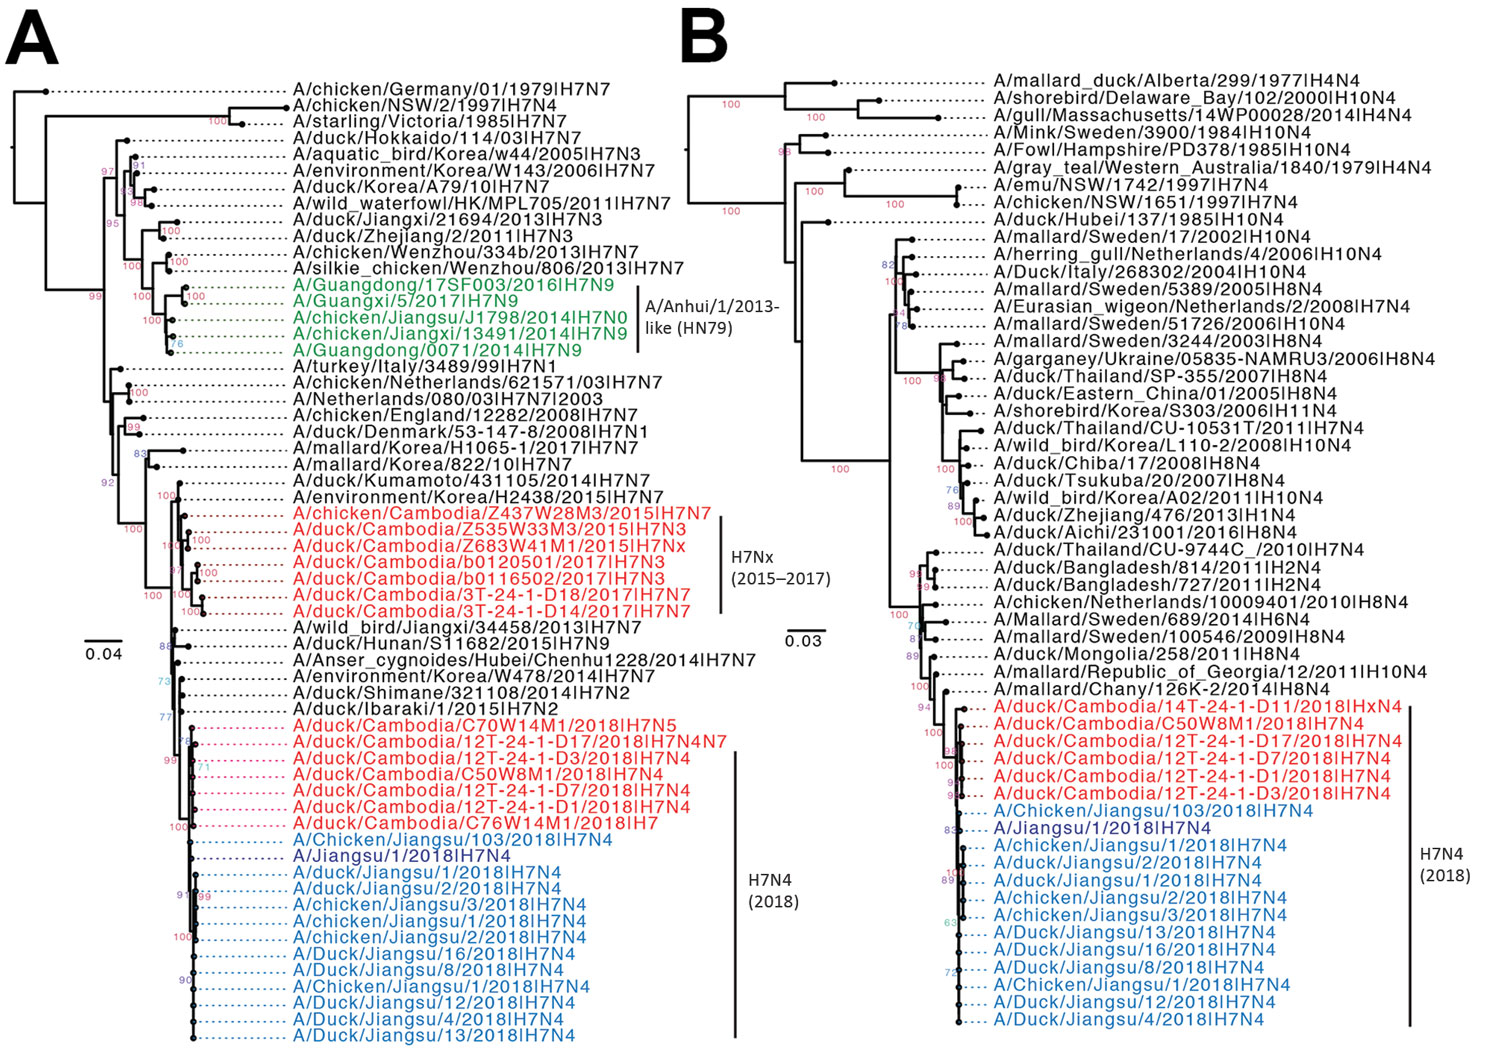 Maximum-likelihood phylogeny of the evolutionary origins of influenza A(H7N4) virus in Cambodia and comparison with reference isolates. H7 hemagglutinin (A) and N4 neuraminidase (B) genes were inferred using a general time-reversible nucleotide substitution model with a gamma distribution of among-site rate variation in RAxML version 8 (https://cme.h-its.org/exelixis/web/software/raxml) and visualized using Figtree version 1.4 (http://tree.bio.ed.ac.uk/software/figtree/). Branch support values w